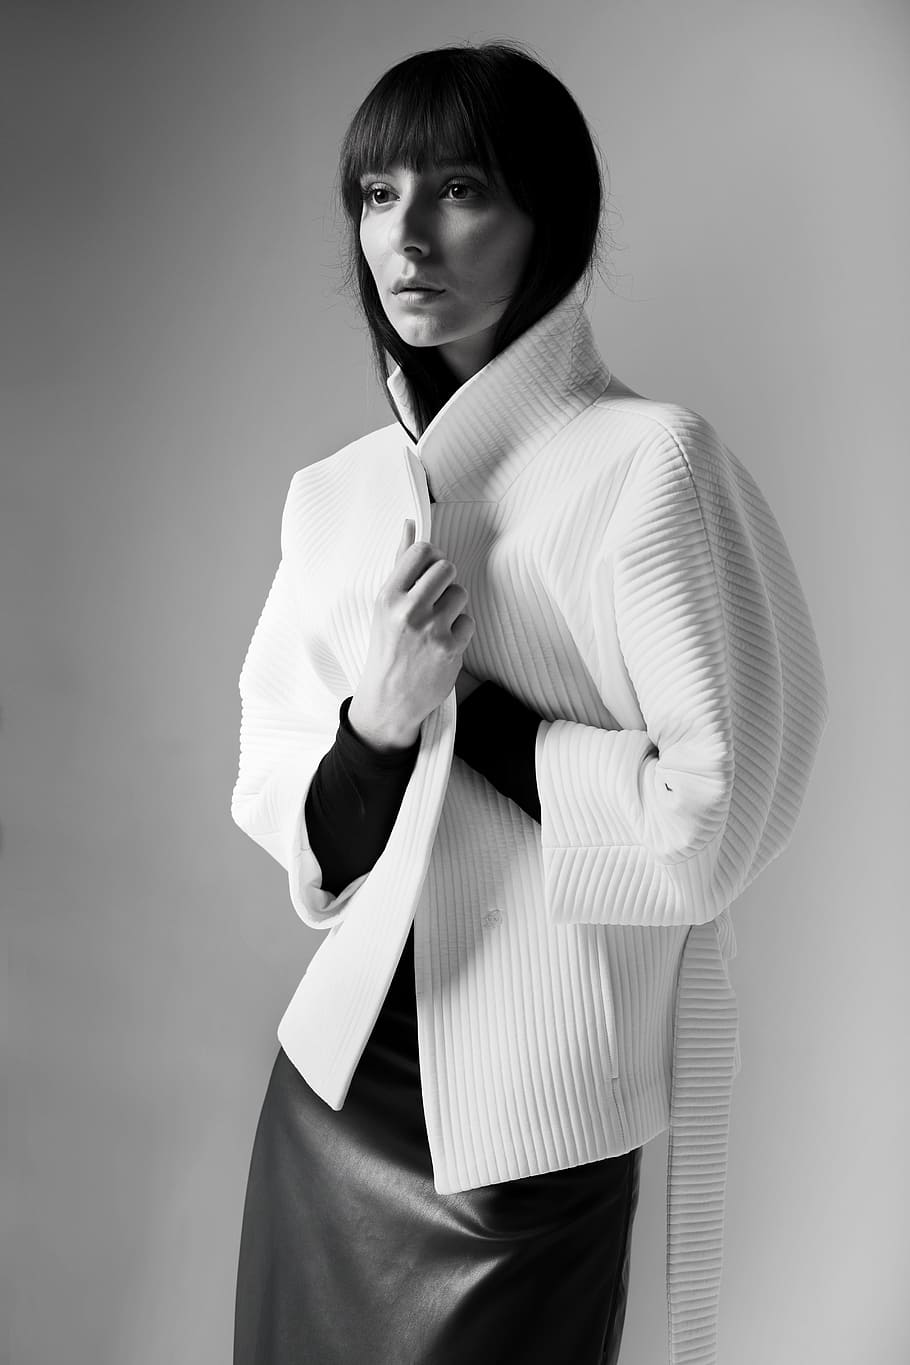 woman, white, jacket, posing, one, portrait, grown up, clothing, fashion, young